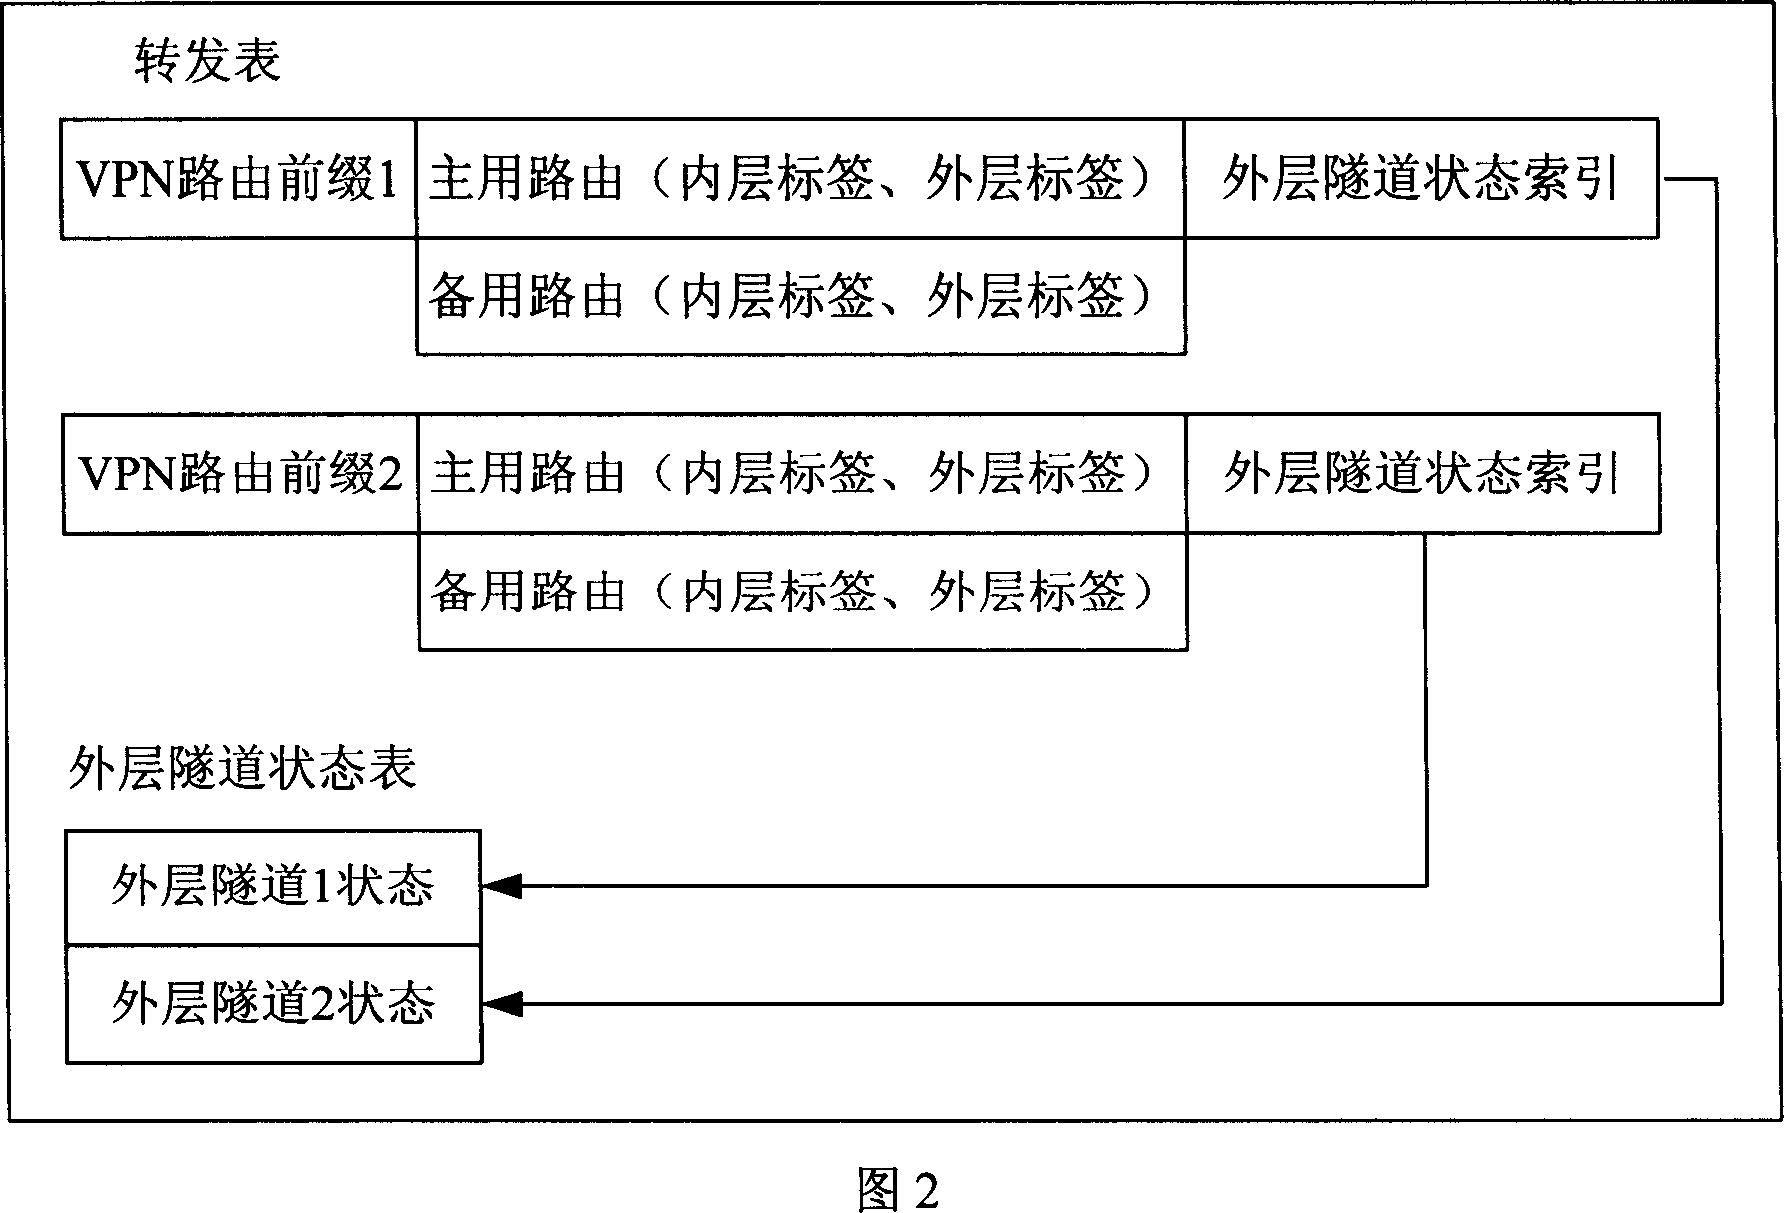 Fast convergence method and device of the end-to-end service